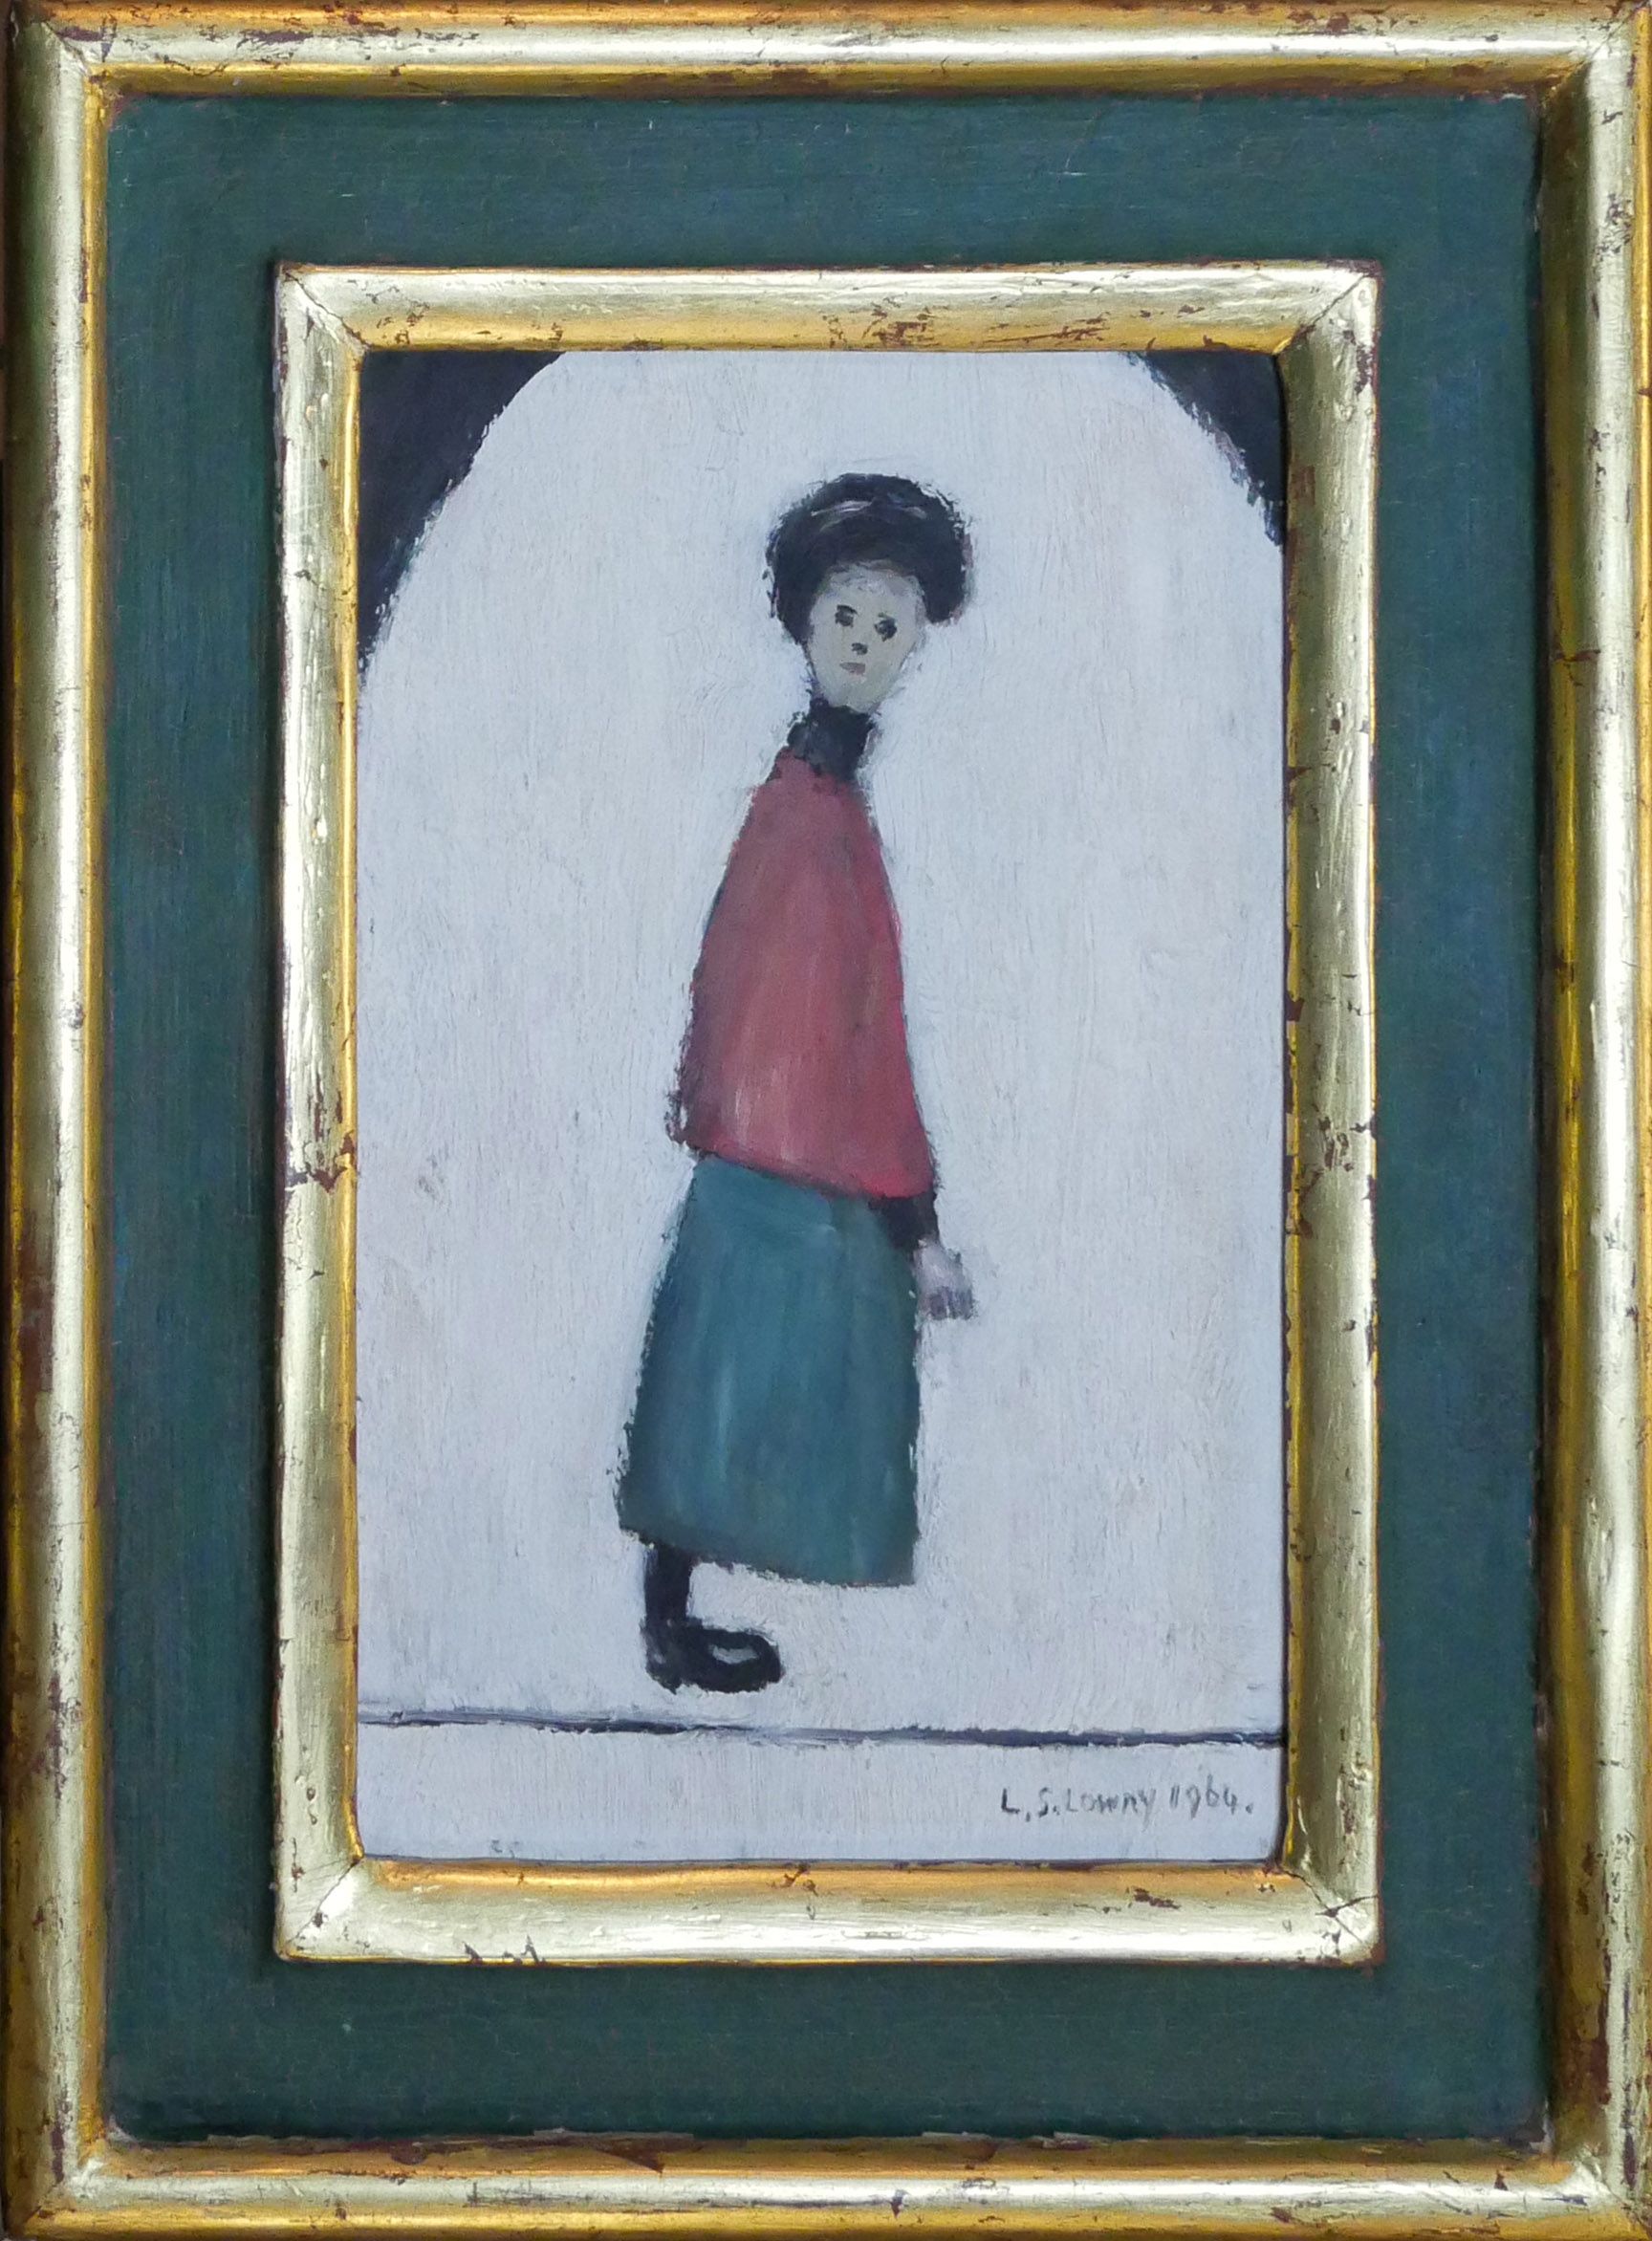 LAWRENCE STEPHEN LOWRY R.A., BRITISH, 1887 0 1976, OIL ON BOARD Titled 'Lady in Waiting', signed and - Image 19 of 41